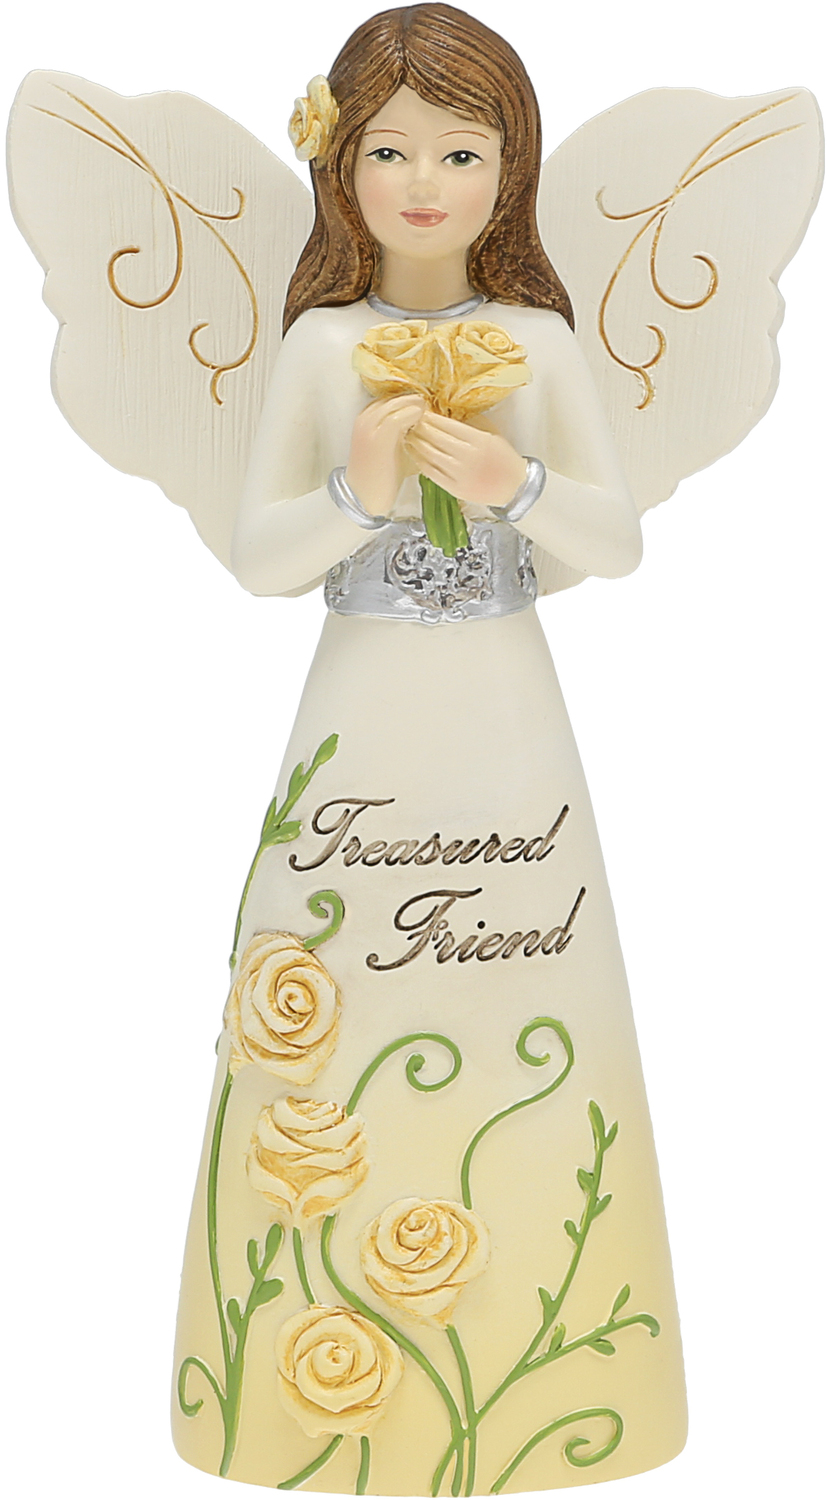 Friend by Elements - Friend - 5" Angel Holding Roses